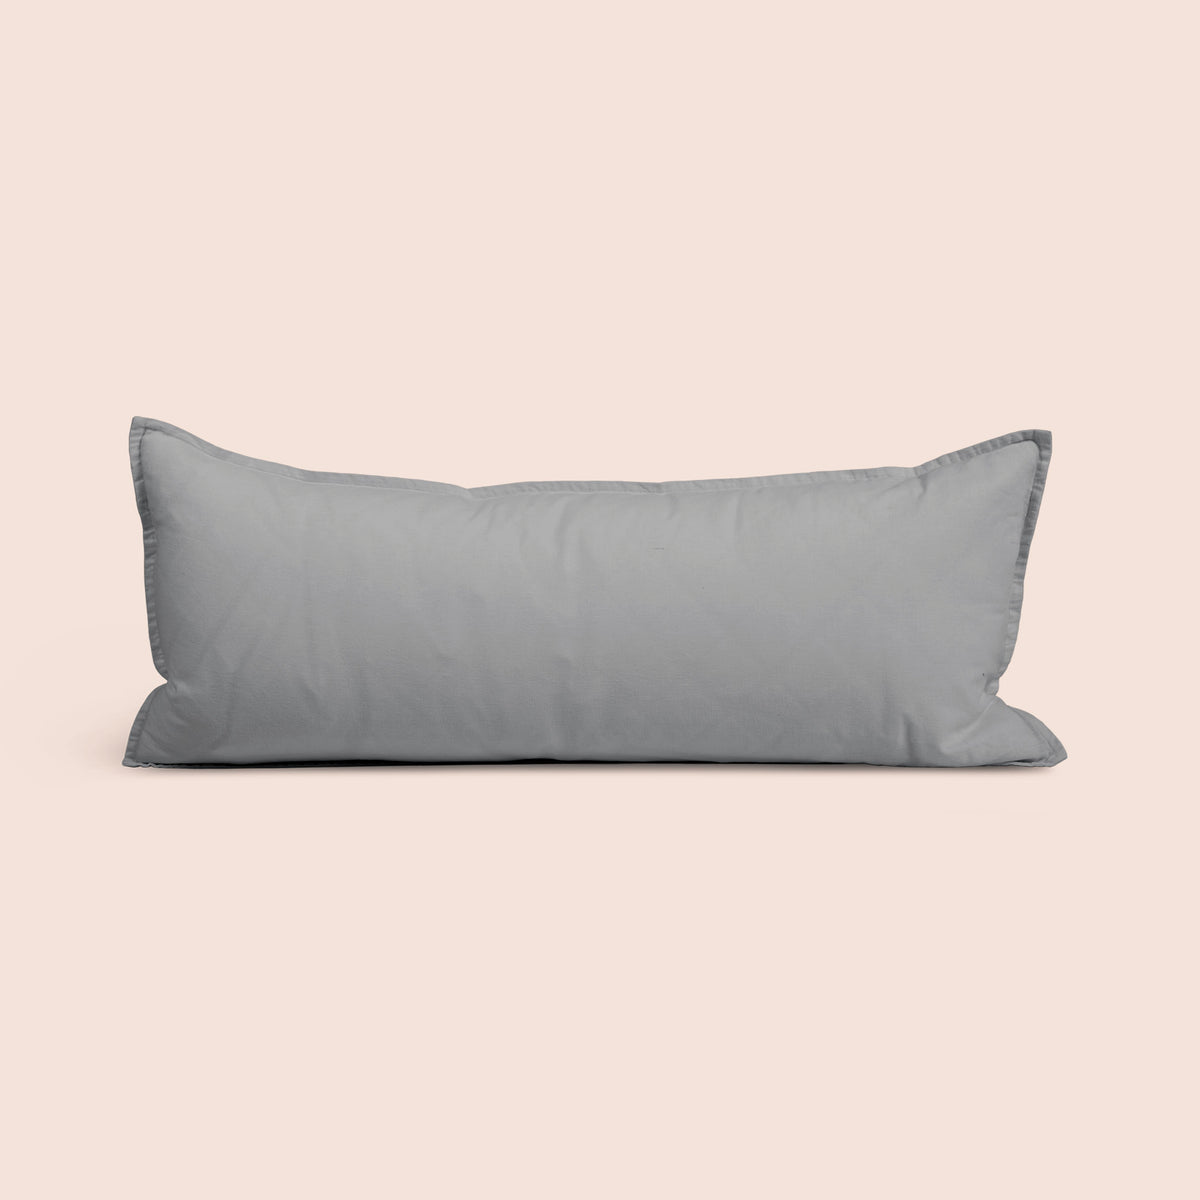 Image of Stone Gray Relaxed Hemp Lumbar Pillow Cover on a lumbar pillow with a light pink background